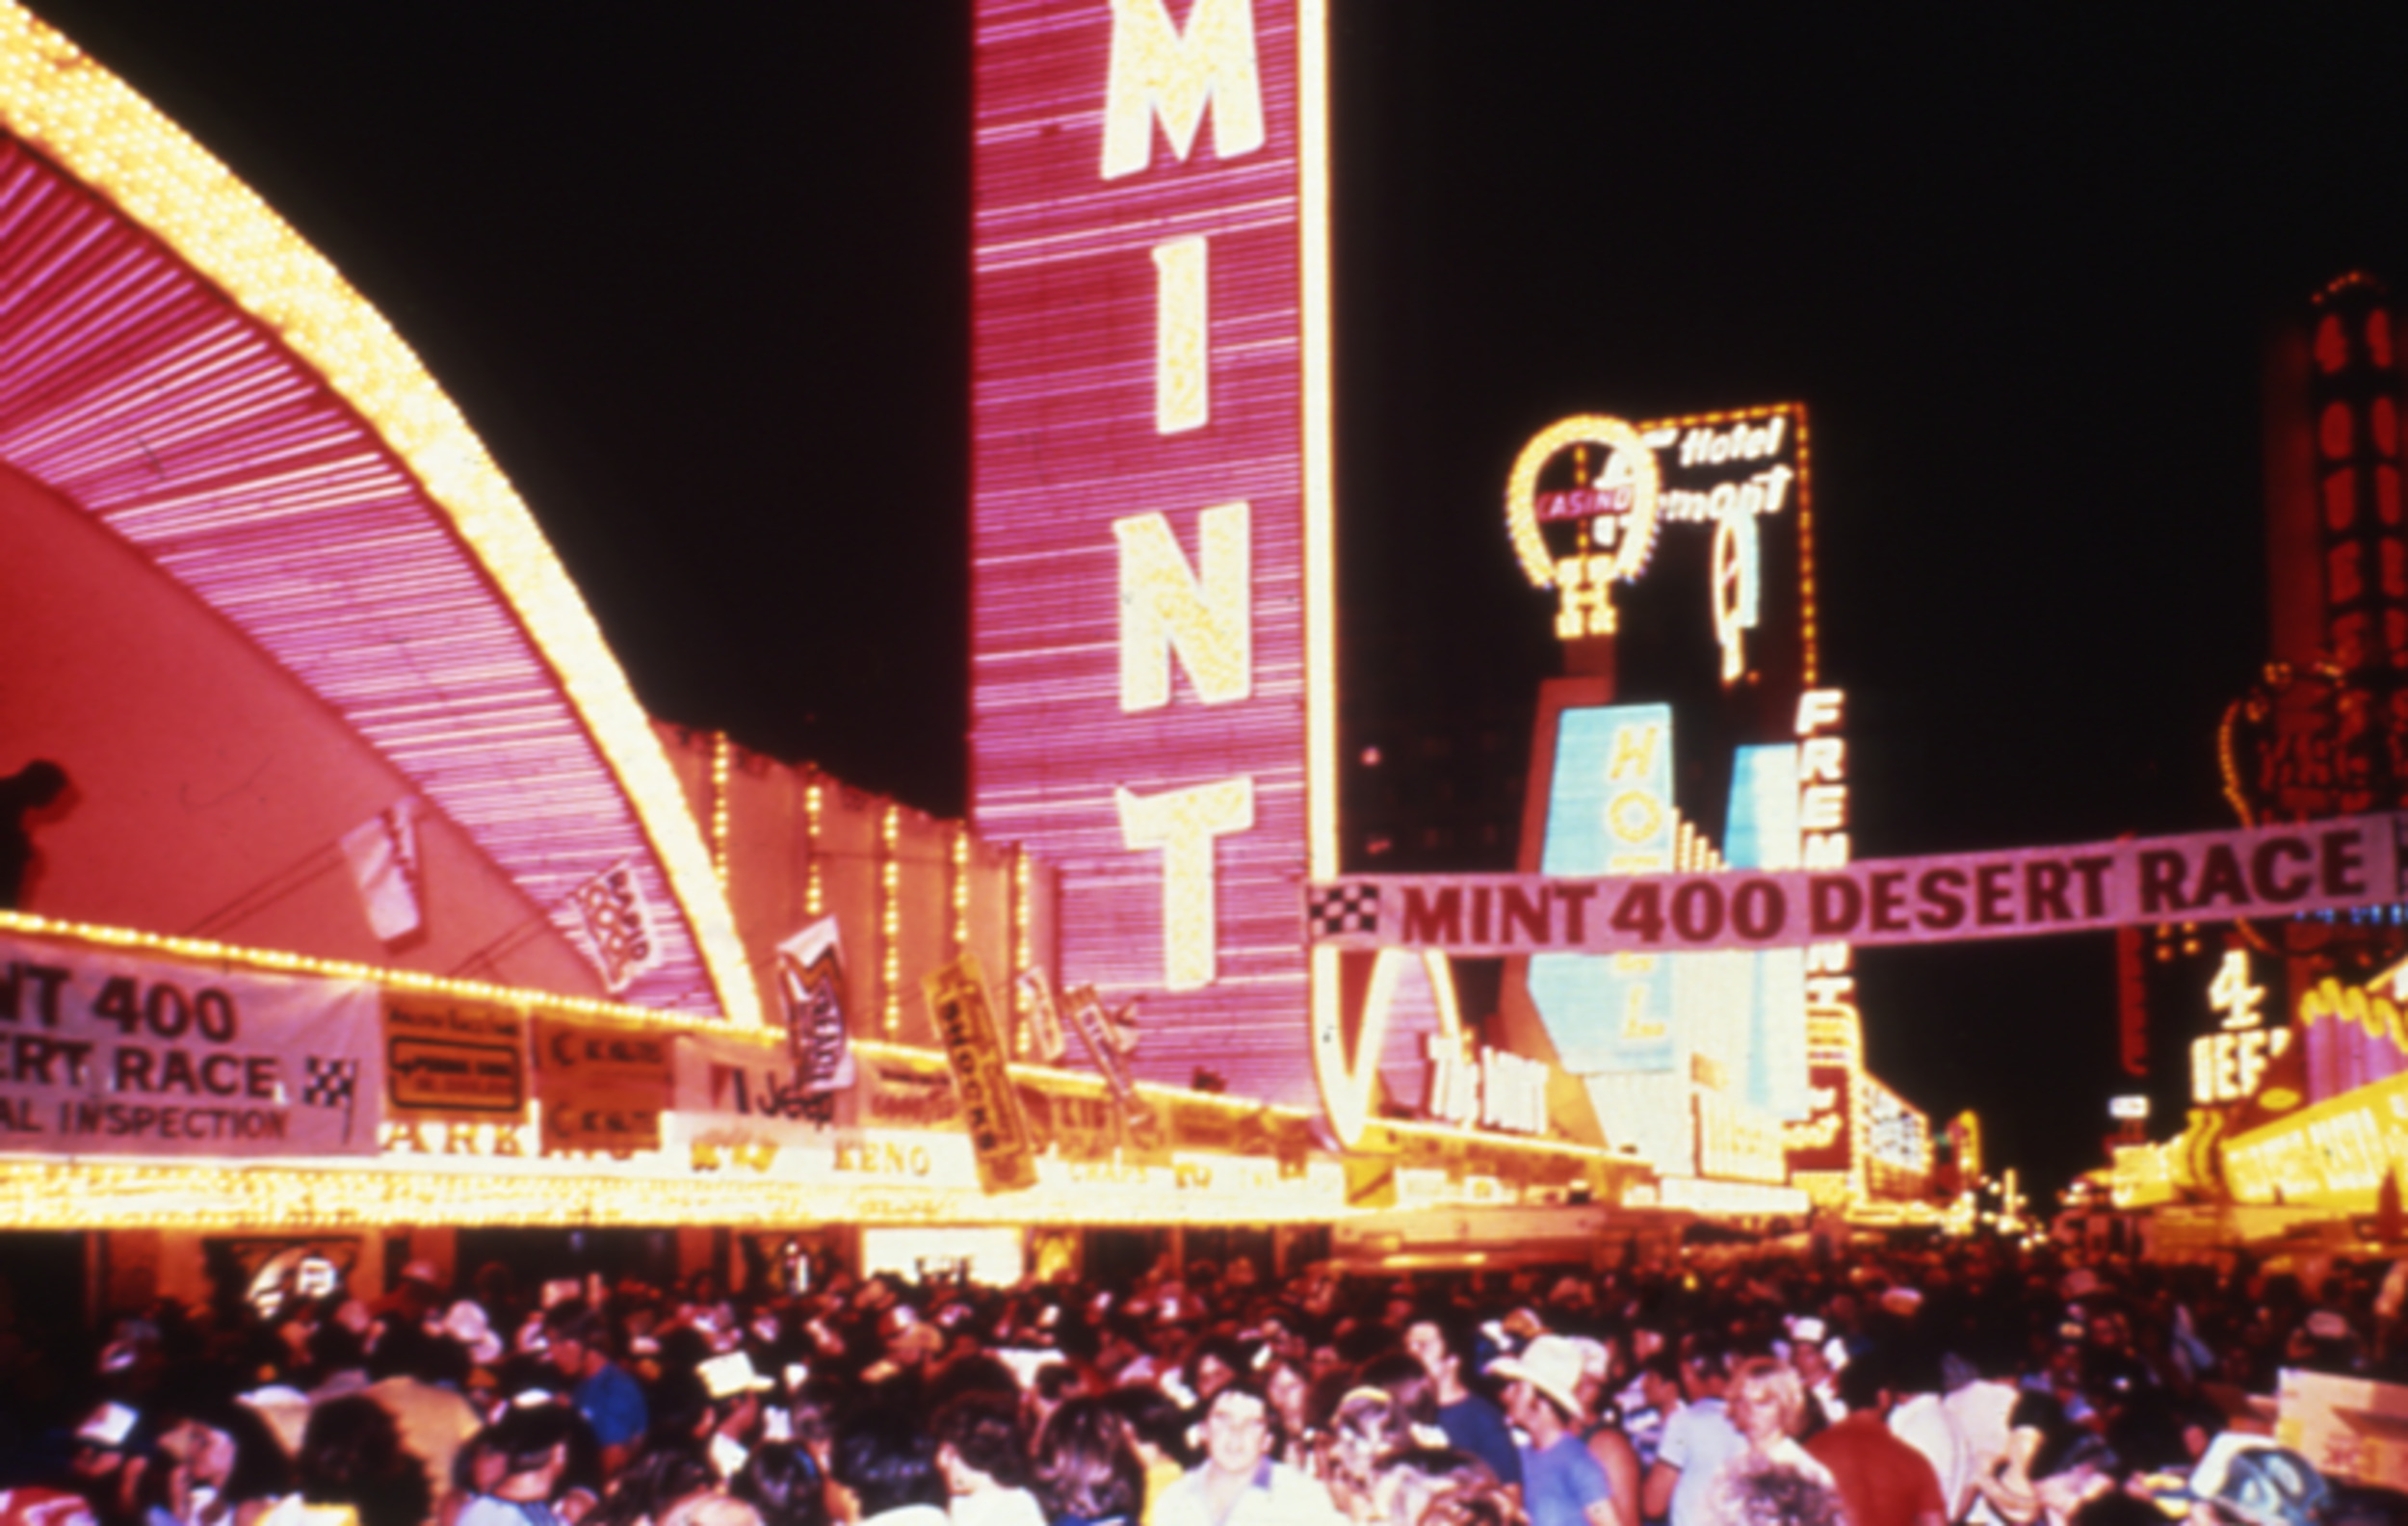 Slide of crowd in front of the Mint Hotel for the Mint 400 Desert Race, Las Vegas, circa 1980s